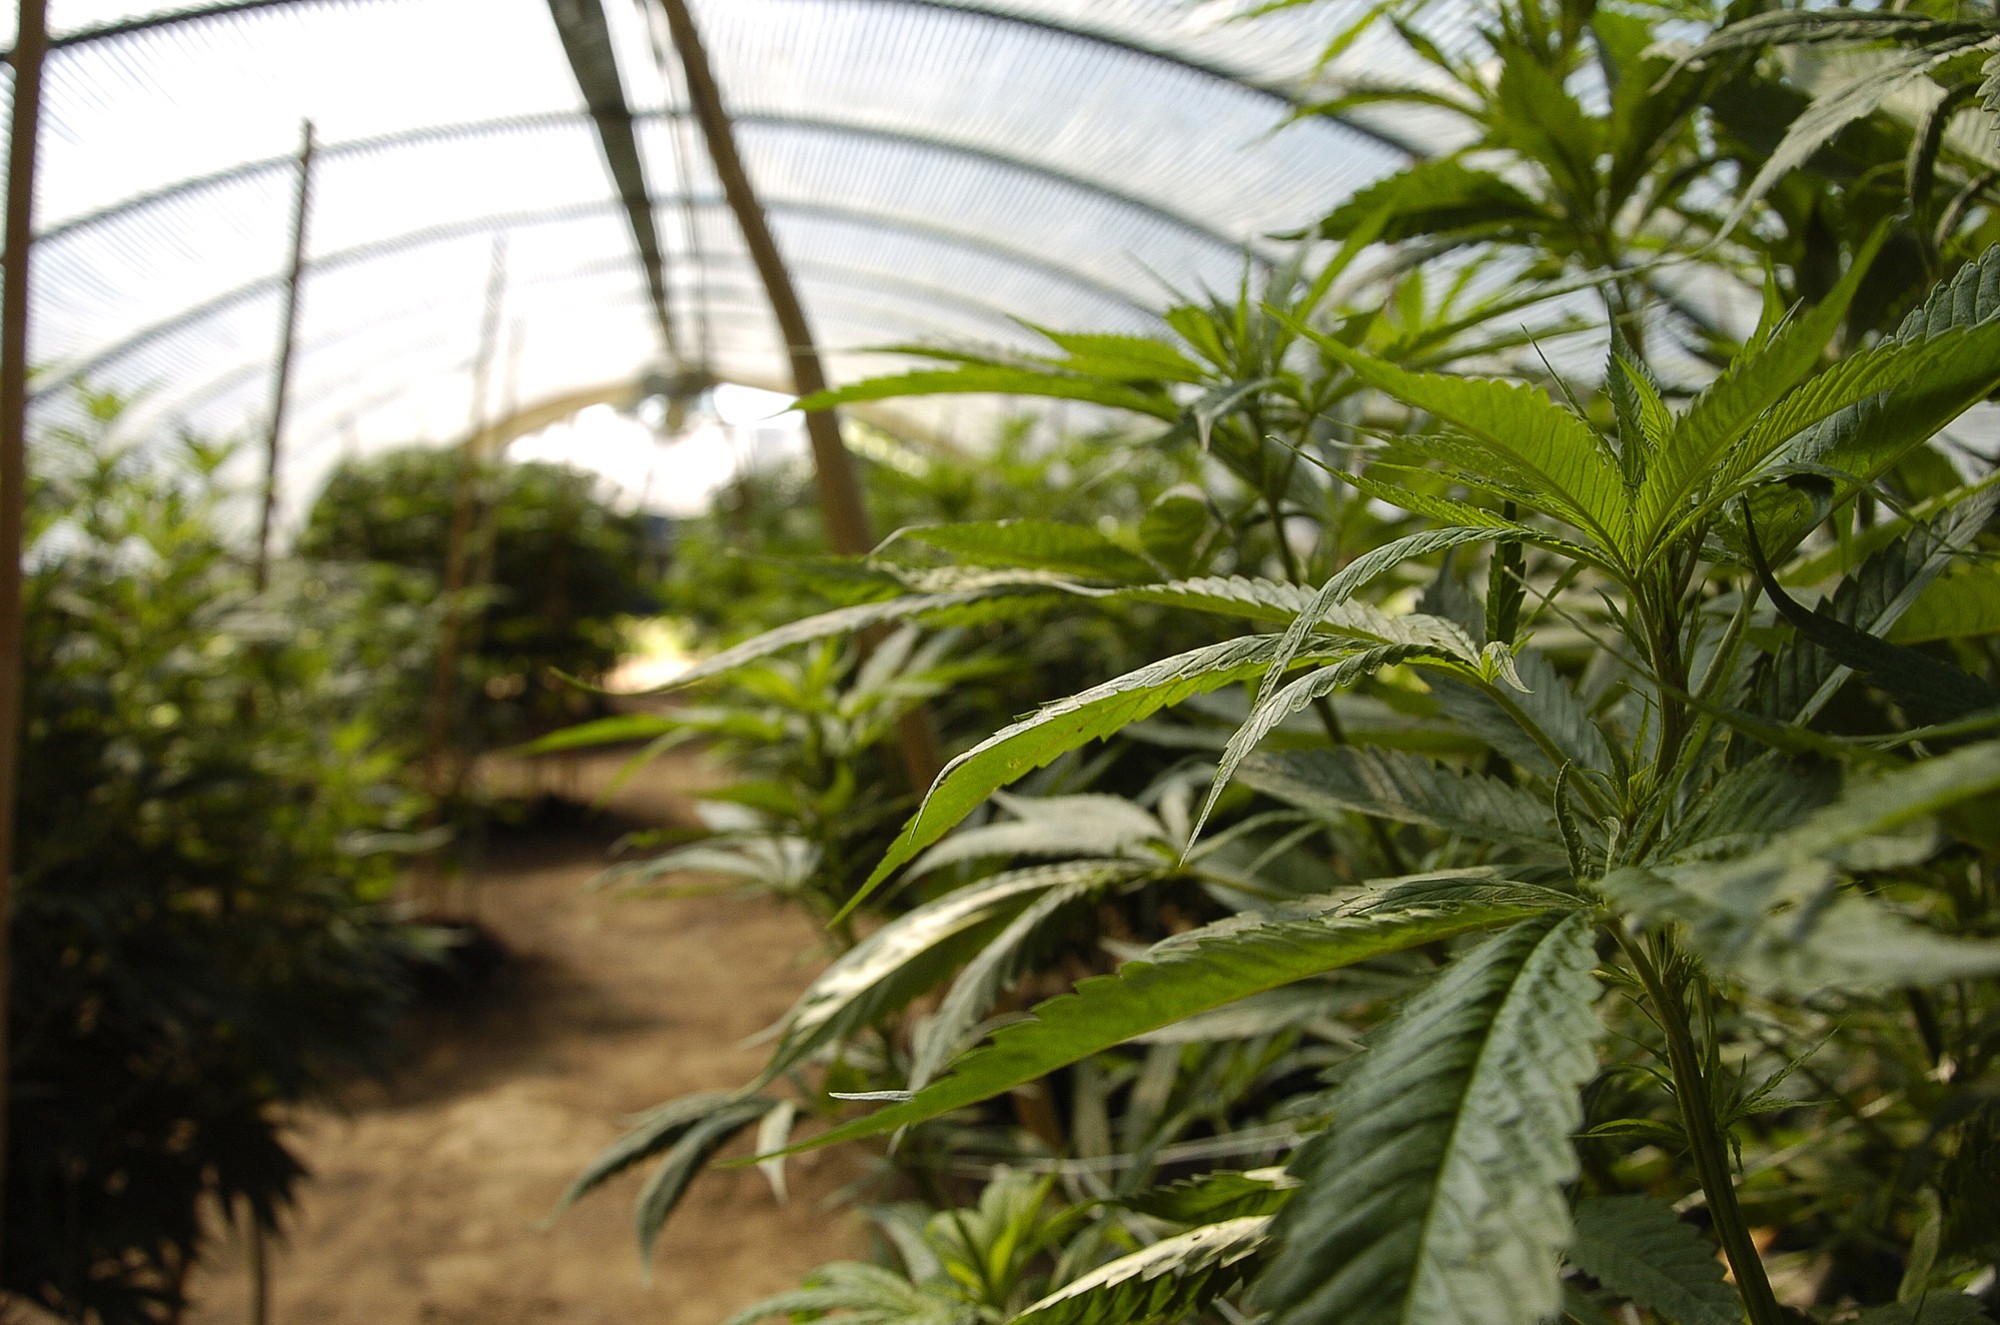 Plants grow at Tom Lauerman's medical marijuana farm in Vancouver. Lauerman hopes to get some of his established medical product line into the recreational market through a potential tribal partner.